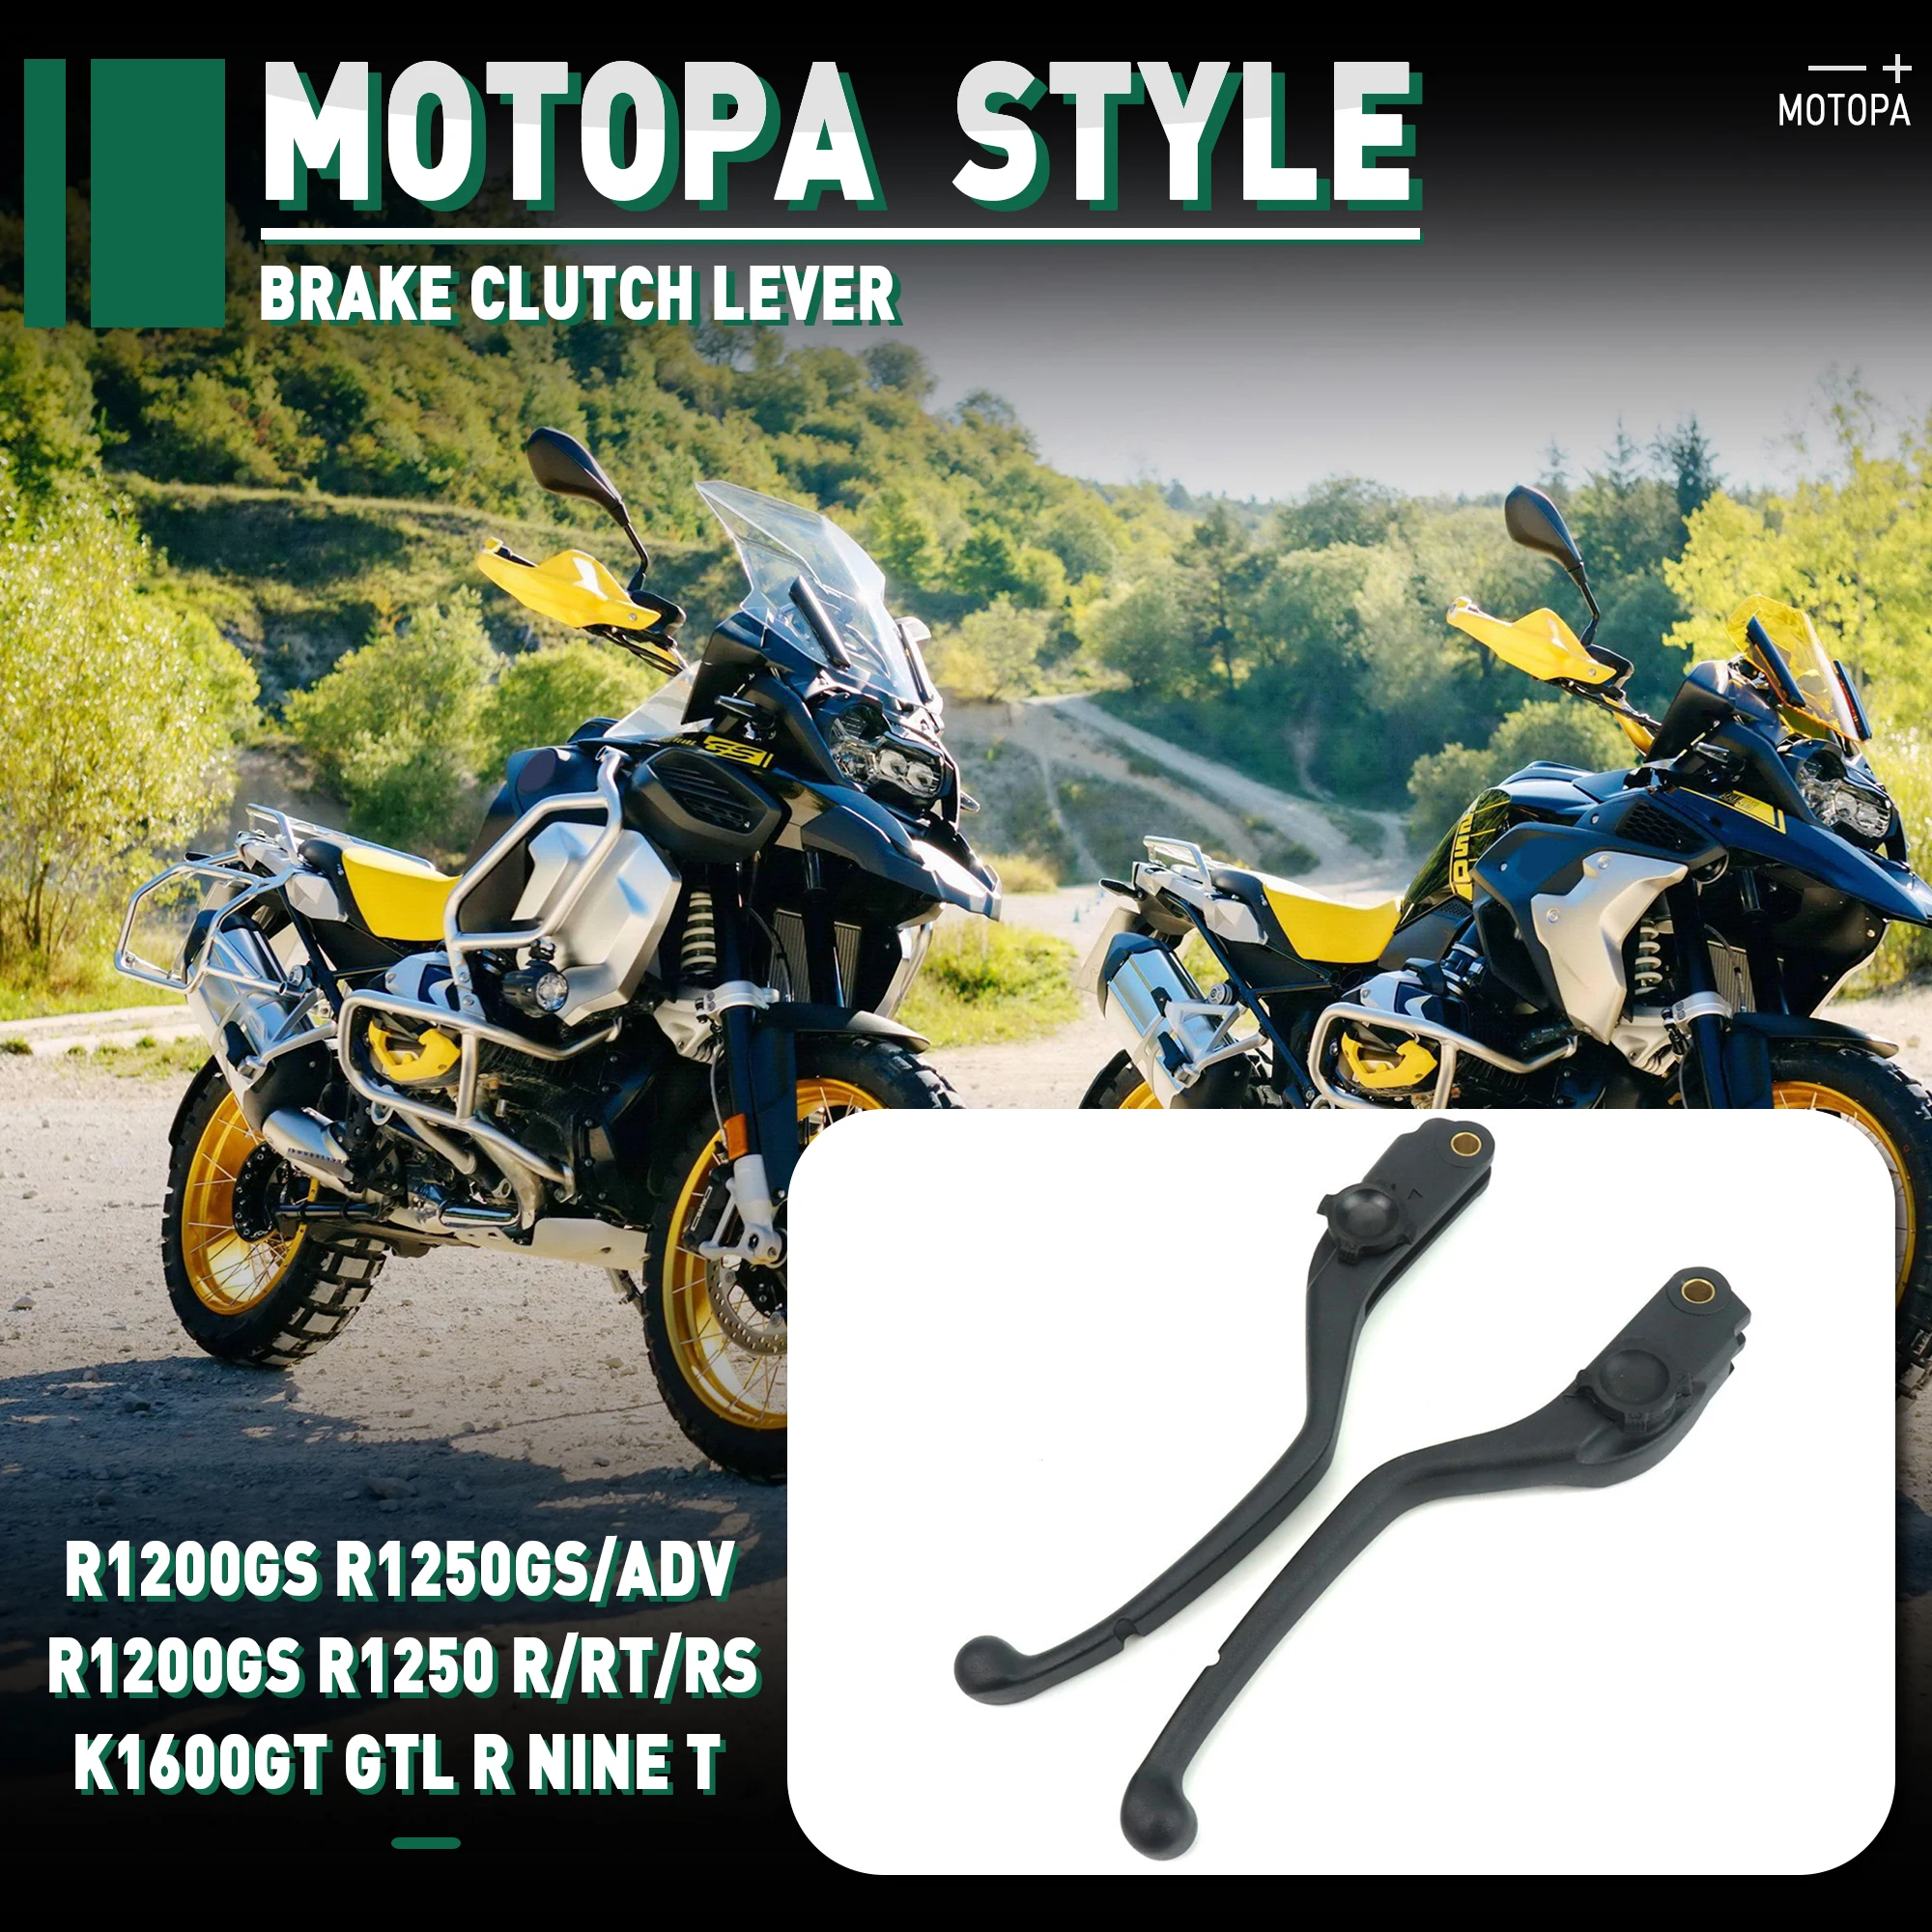 

NEW Front Clutch Brakes Lever Motorcycle Handle For BMW R1200 R1250 GS RS RT R1200GS ADV R1200R R1200RT R Nine T